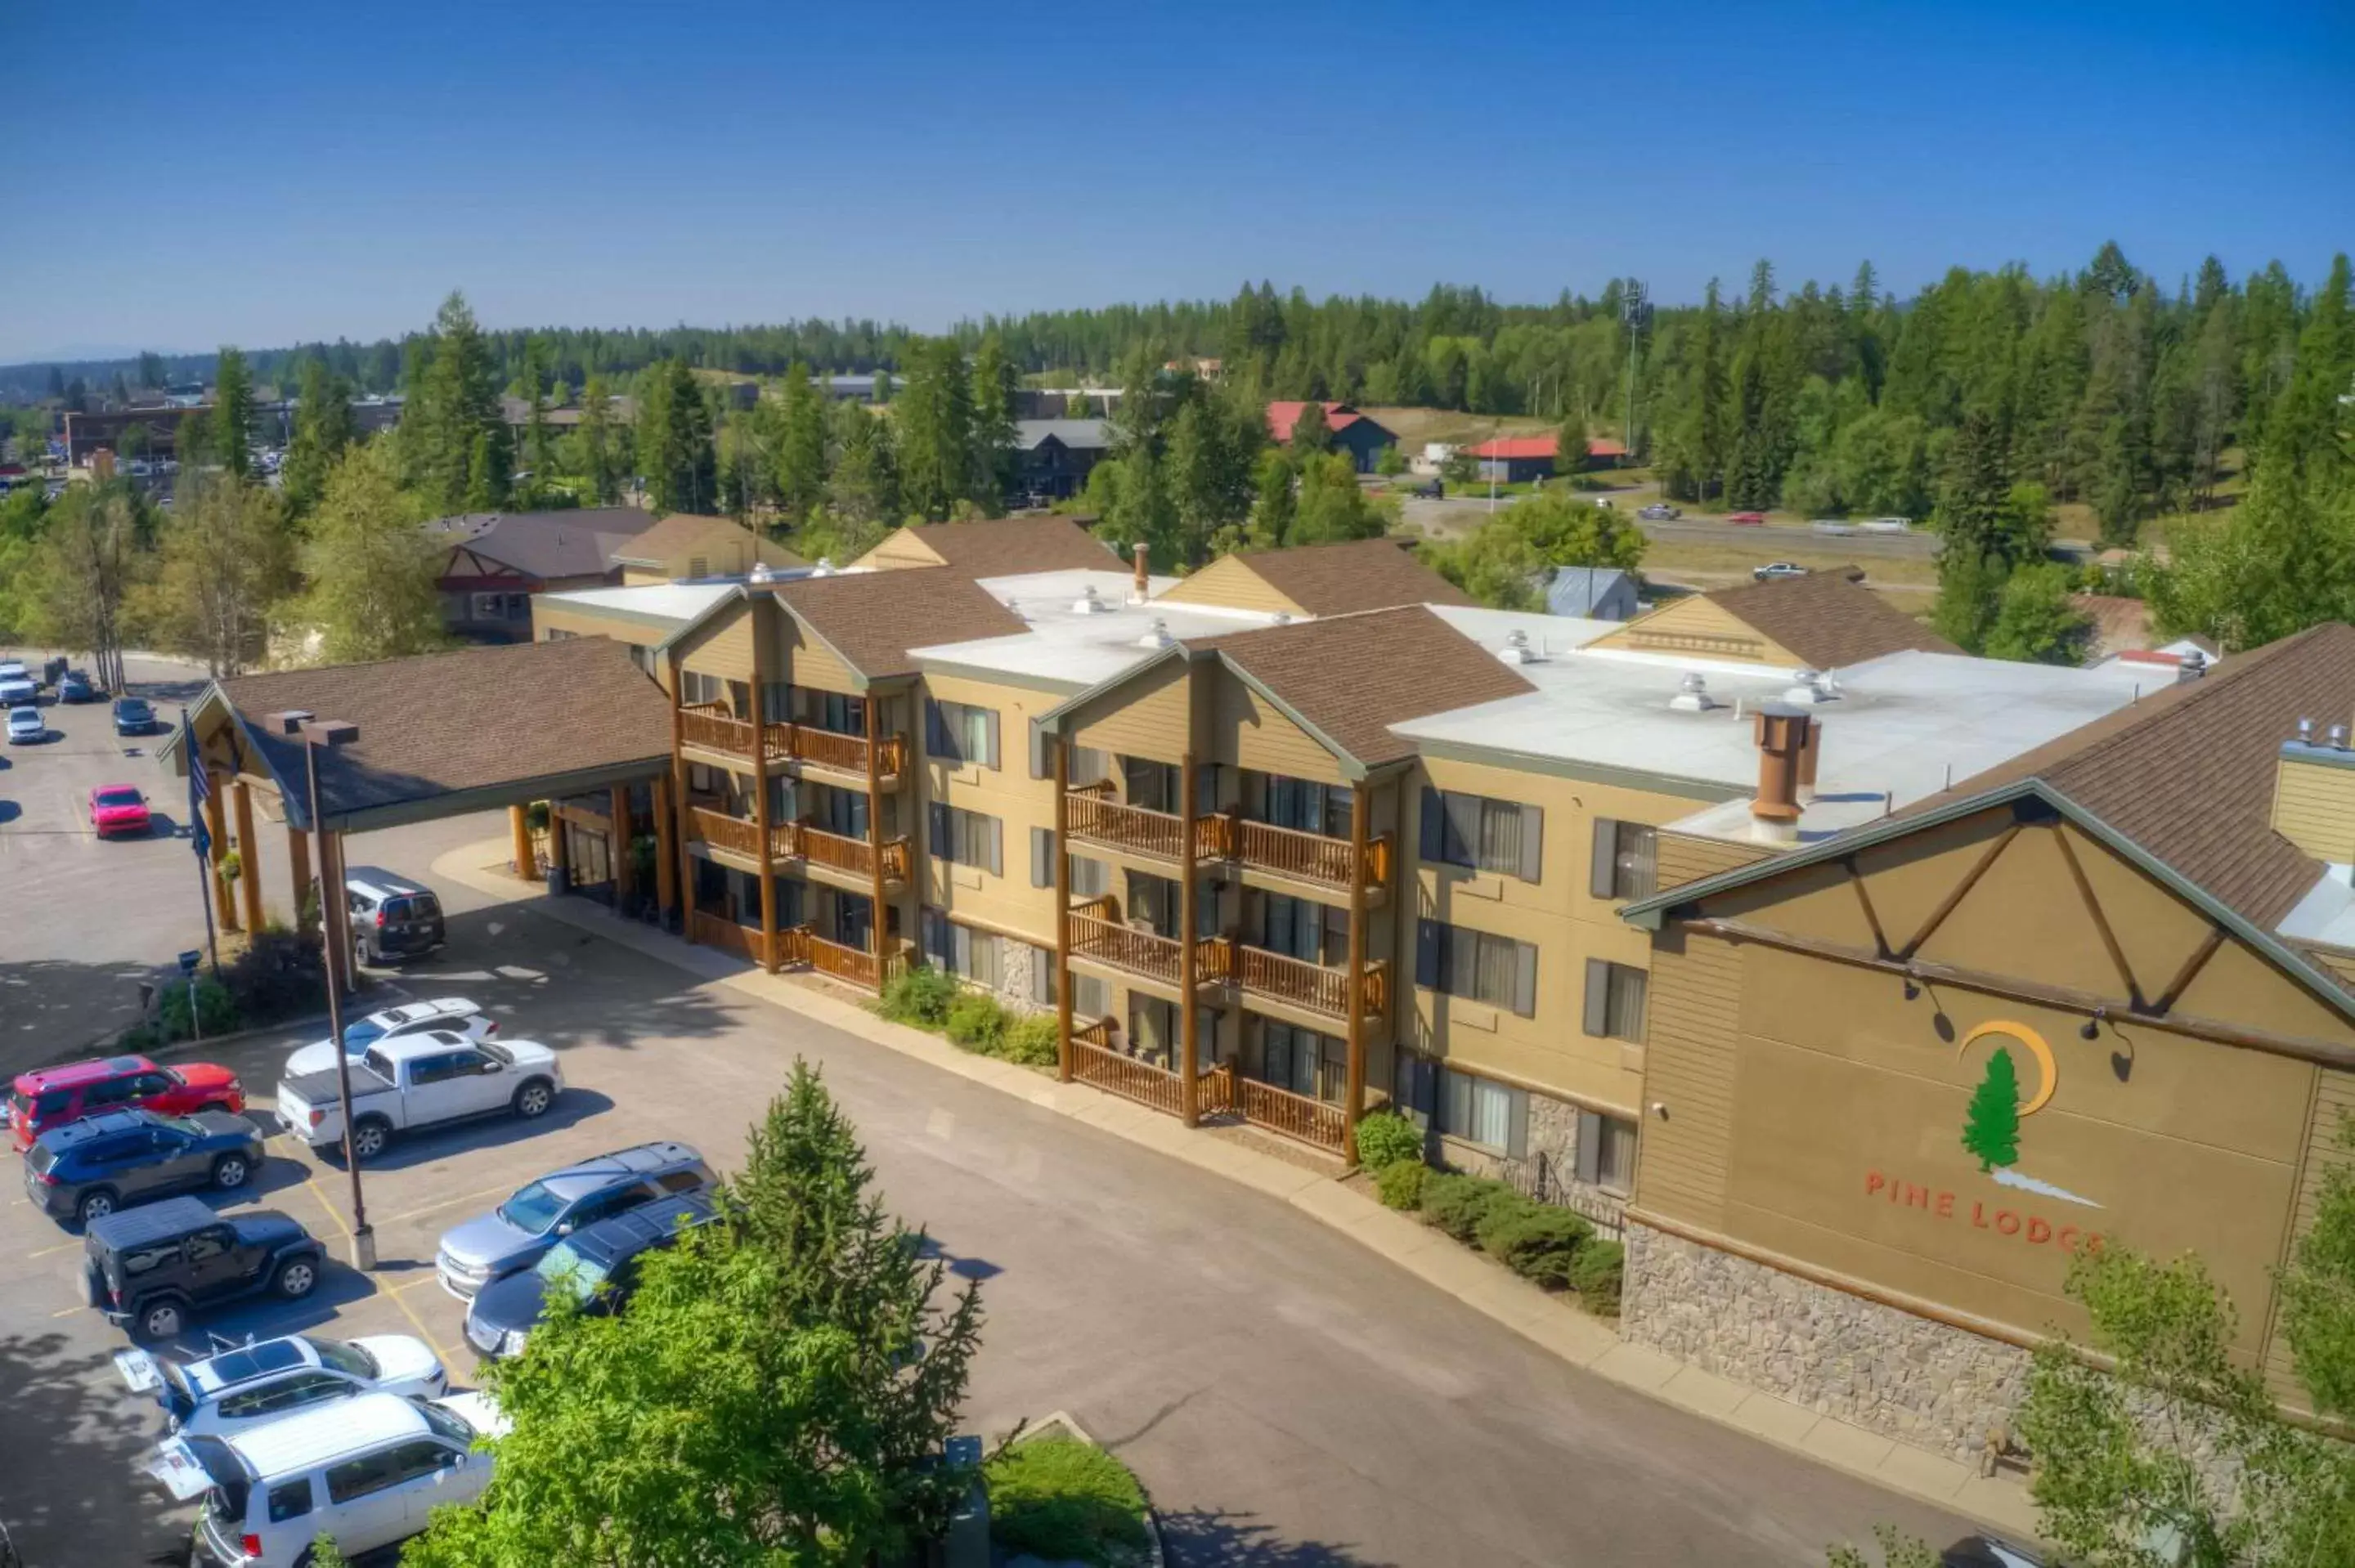 Property building in The Pine Lodge on Whitefish River, Ascend Hotel Collection